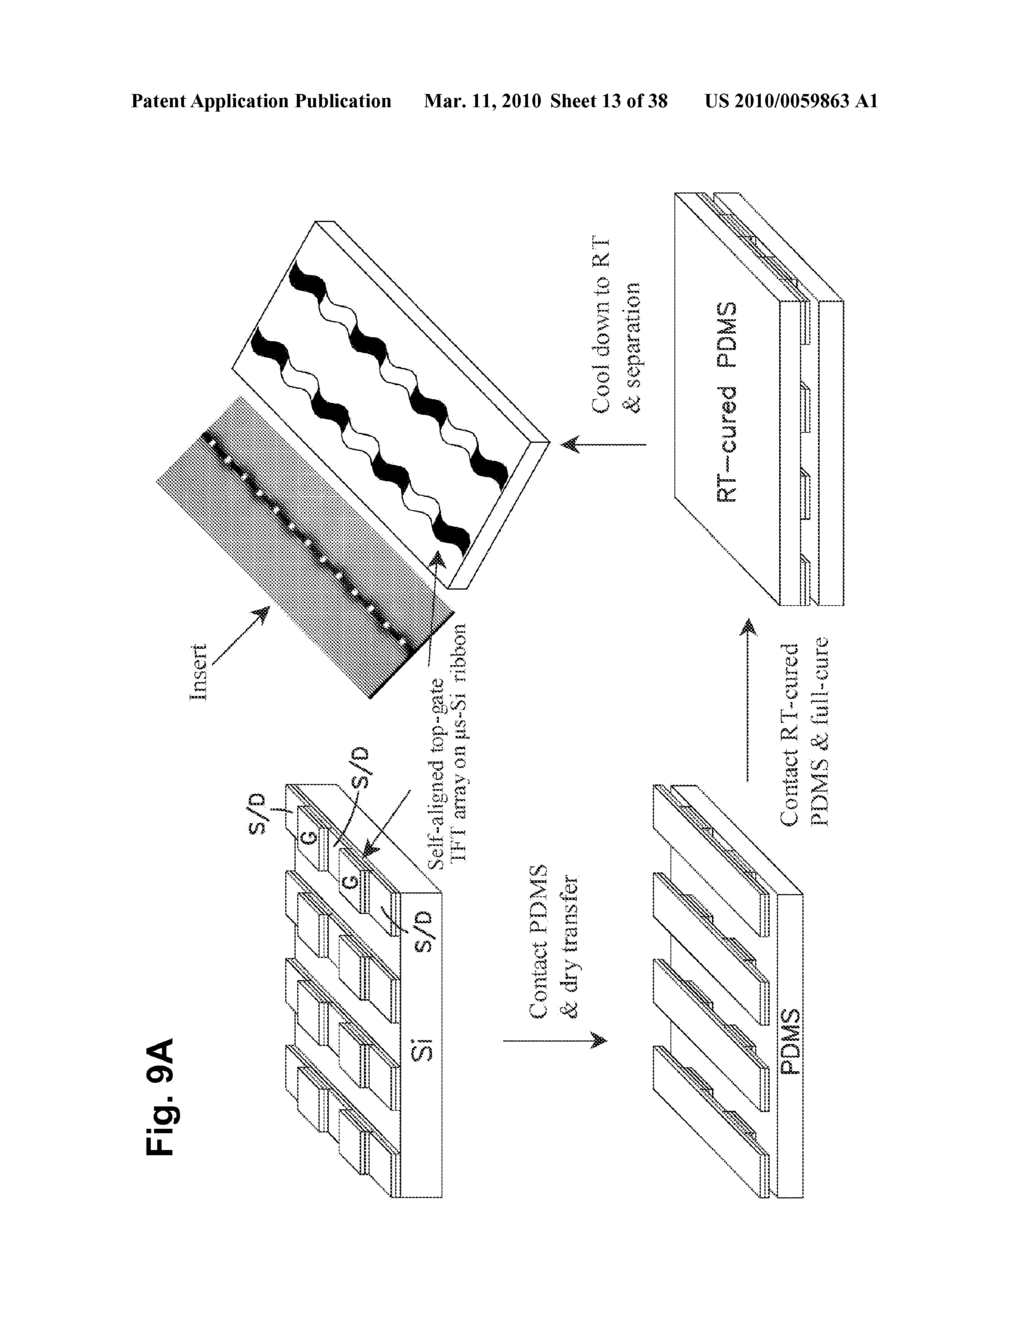 Stretchable Form of Single Crystal Silicon for High Performance Electronics on Rubber Substrates - diagram, schematic, and image 14